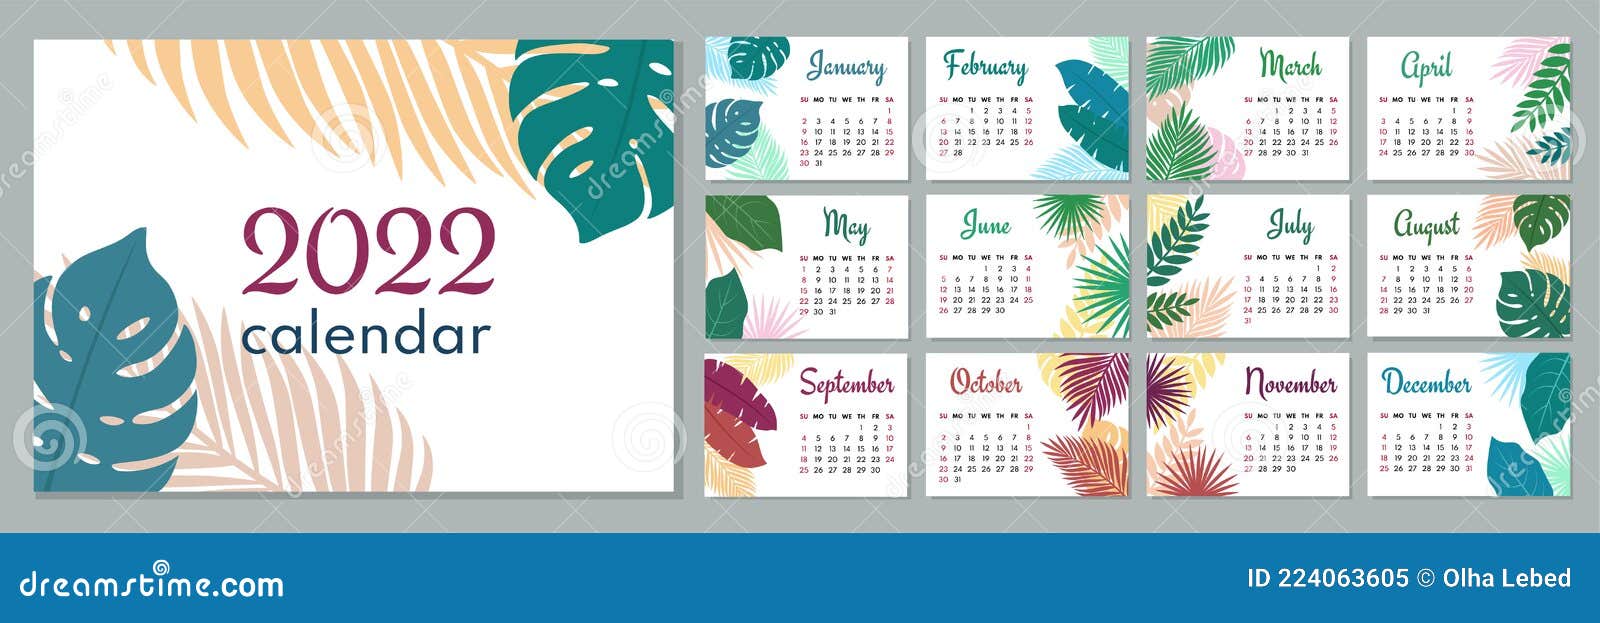 Free Downloadable Calendar 2022 2022 Calendar Template. Calendar Concept Design With Leaves. Week Starts On  Sunday. Set Of 12 Months 2022 Pages. Stock Vector - Illustration Of Annual,  Colorful: 224063605